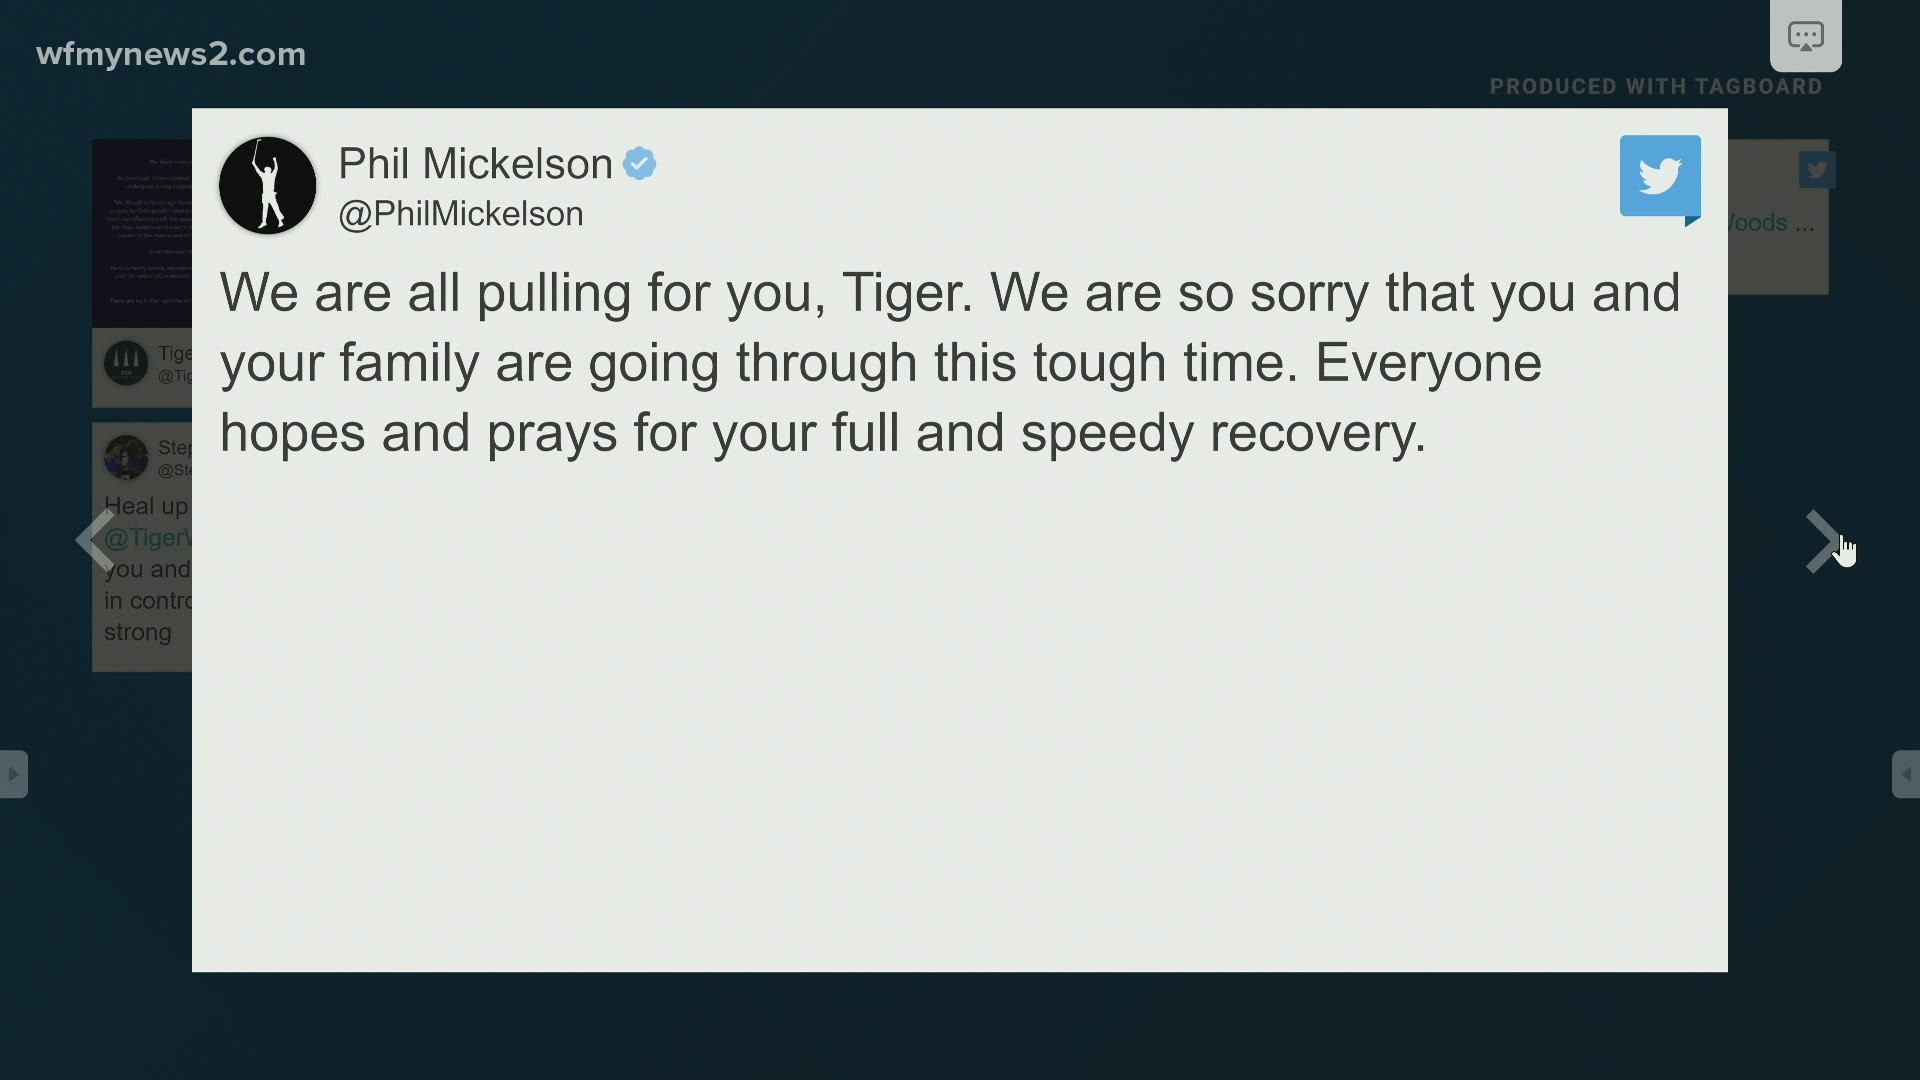 Social media is flooded with recovery wishes for the golfer as he recovers from surgery on his leg and ankle.